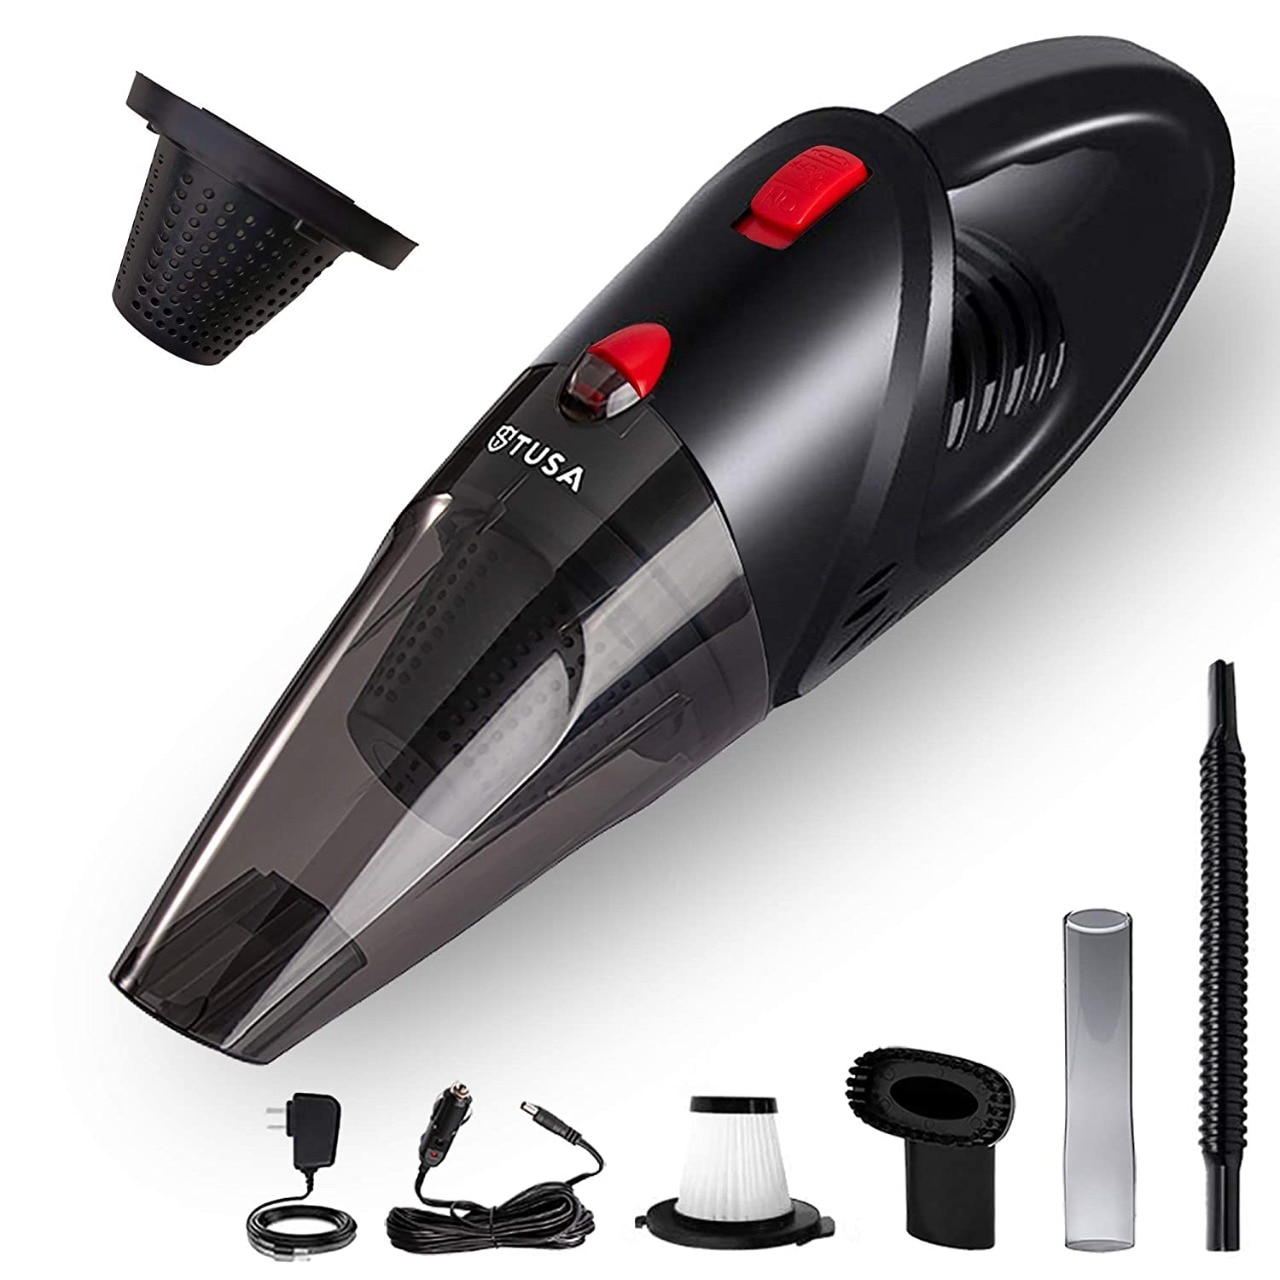 Amazon Festival Sale: Best 5 cordless vacuum cleaners for home and car are available in Amazon's sale for just Rs.